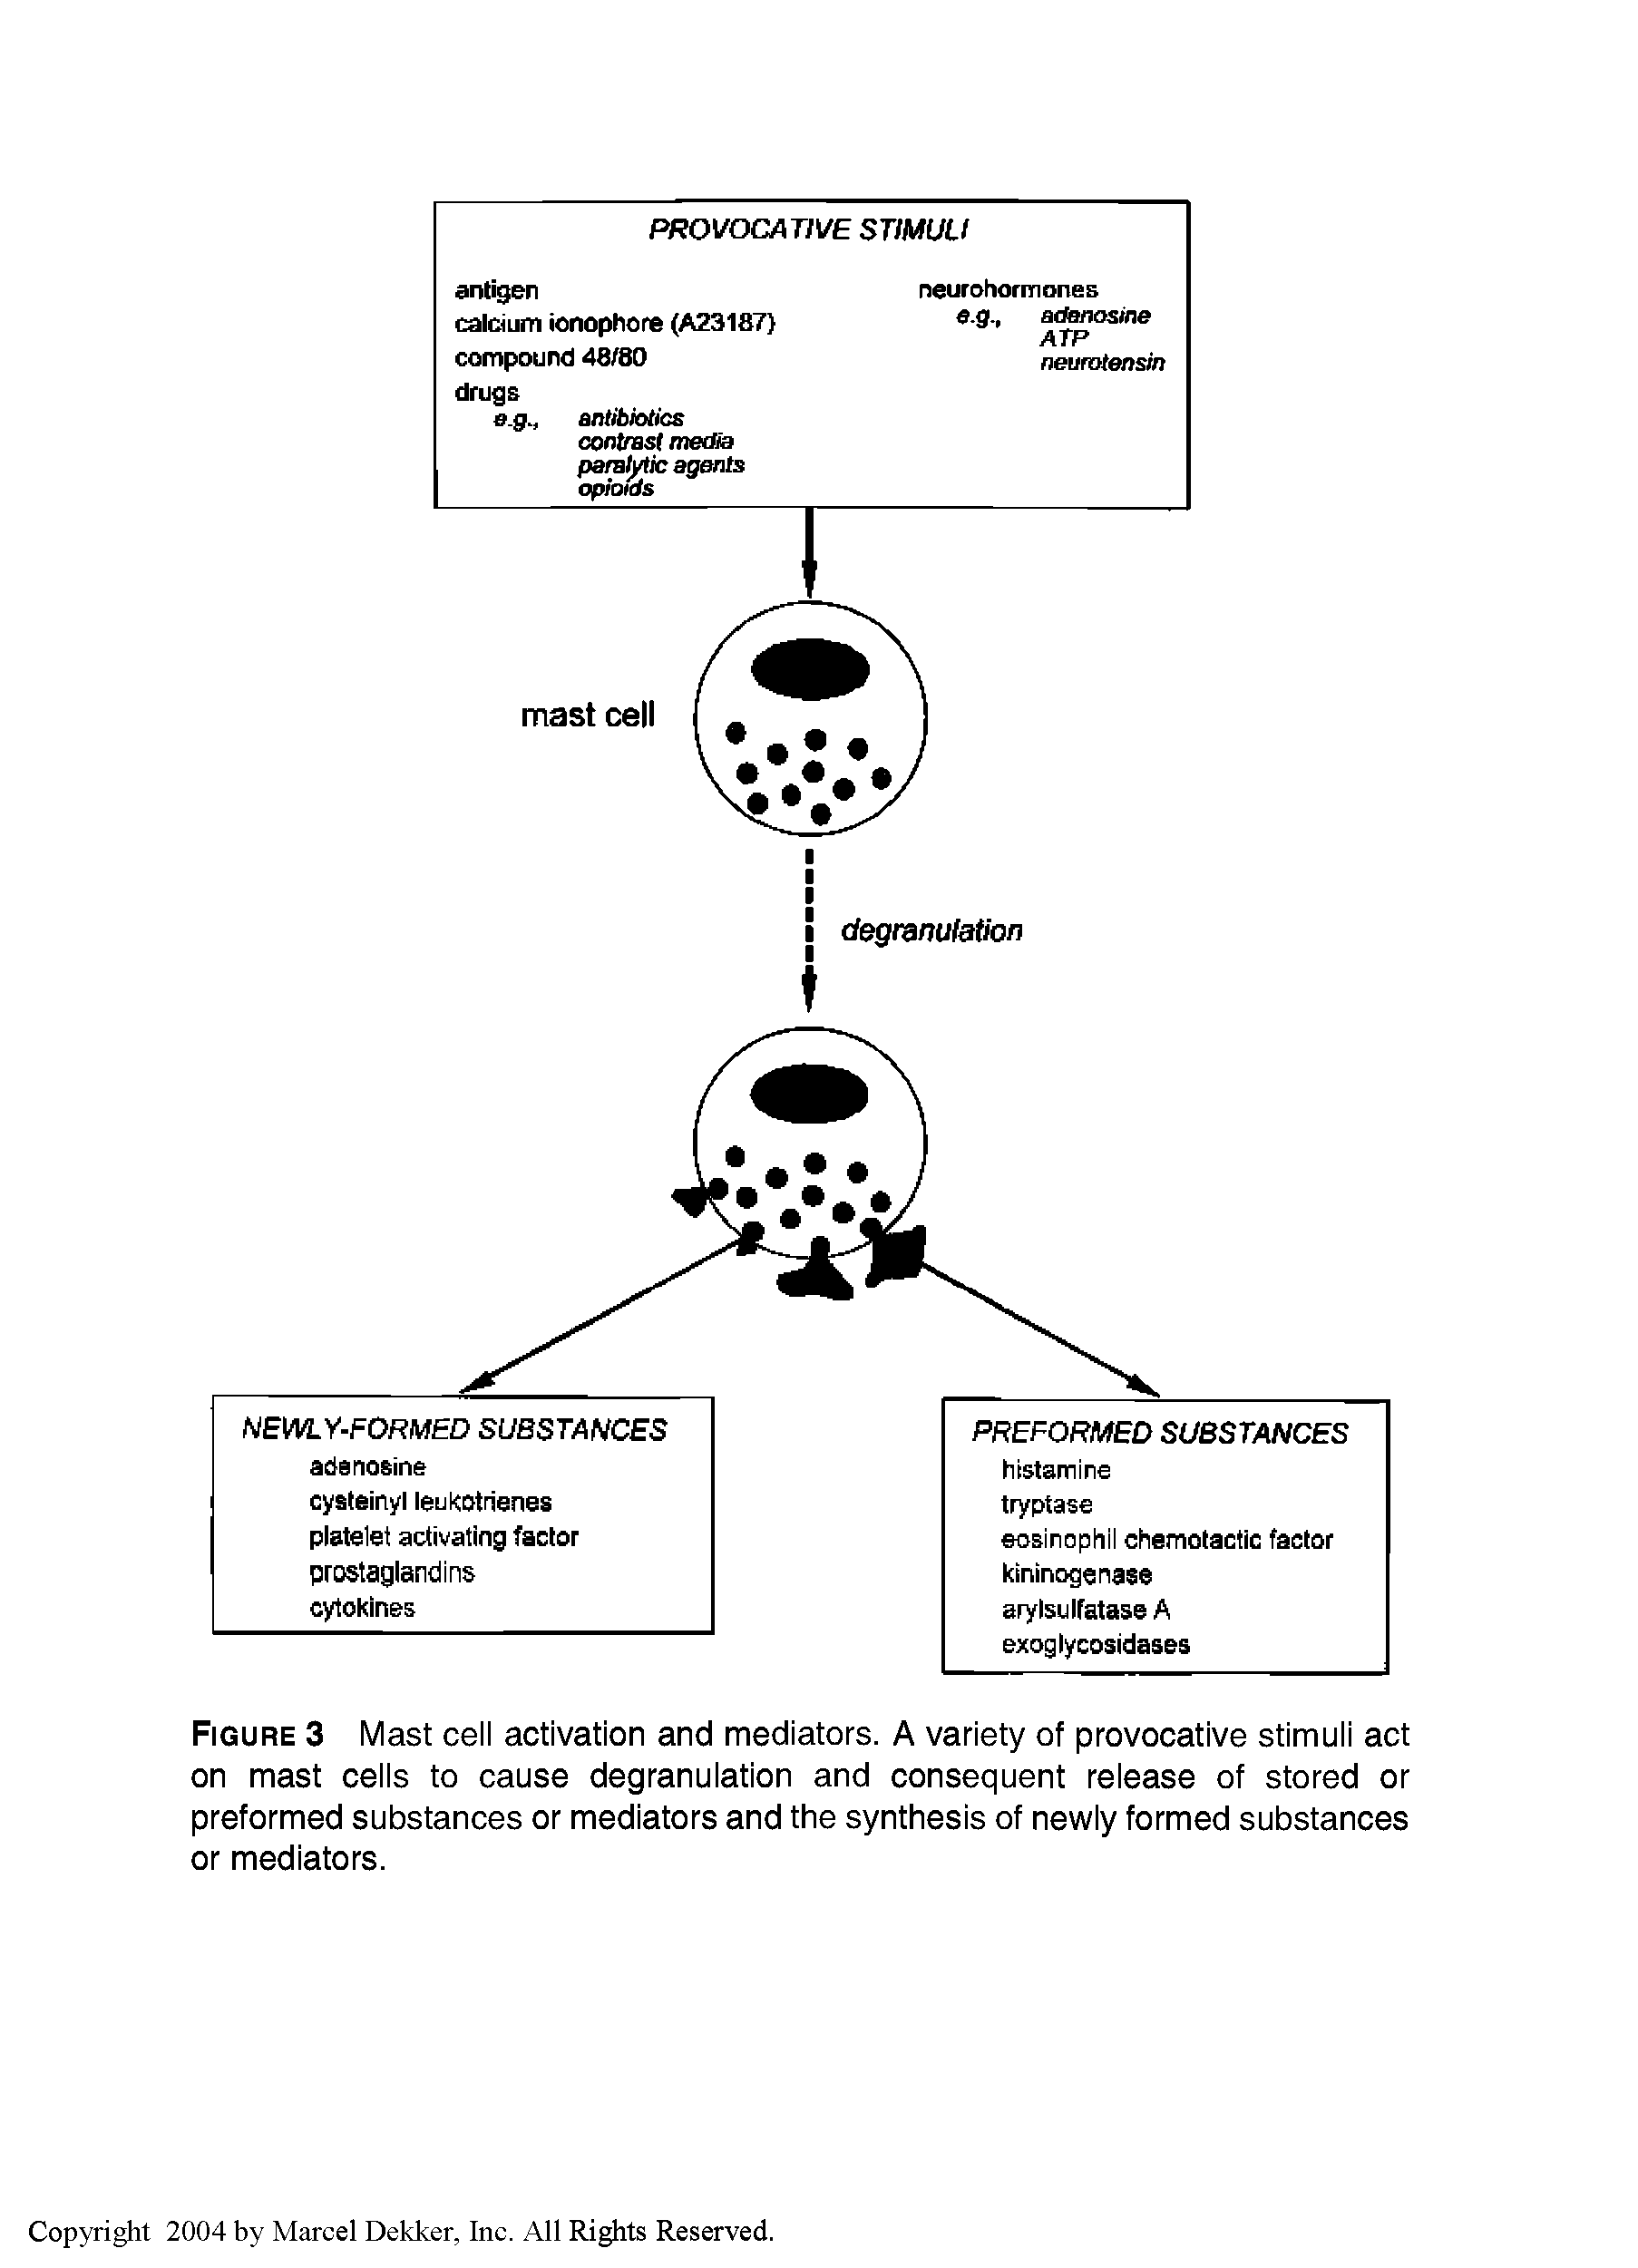 Figure 3 Mast cell activation and mediators. A variety of provocative stimuli act on mast cells to cause degranulation and consequent release of stored or preformed substances or mediators and the synthesis of newly formed substances or mediators.